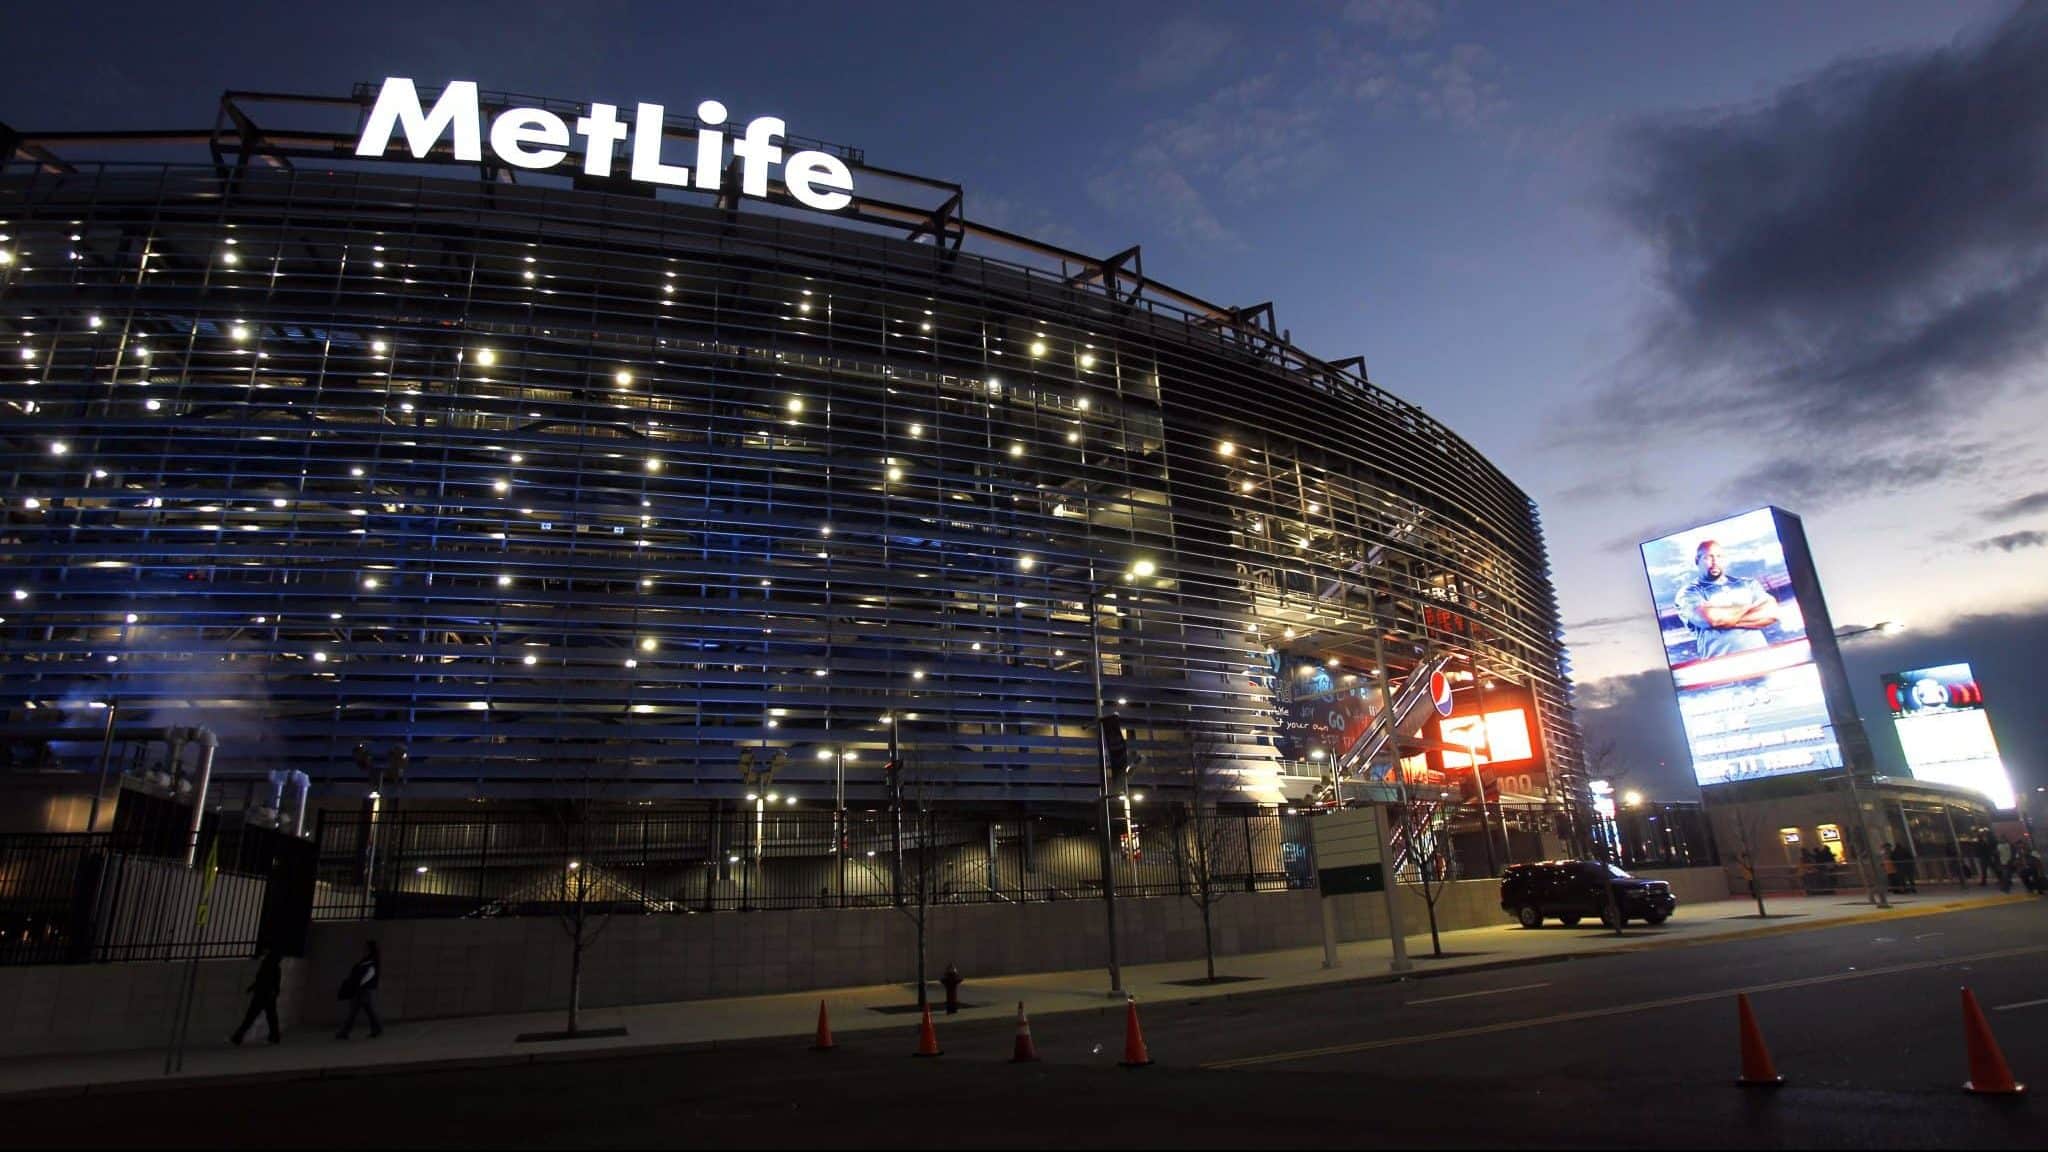 EAST RUTHERFORD, NJ - JANUARY 1: Exterior of MetLife Stadium before the start of the Dallas Cowboys vs New York Giants on January 1, 2012 in East Rutherford, New Jersey.